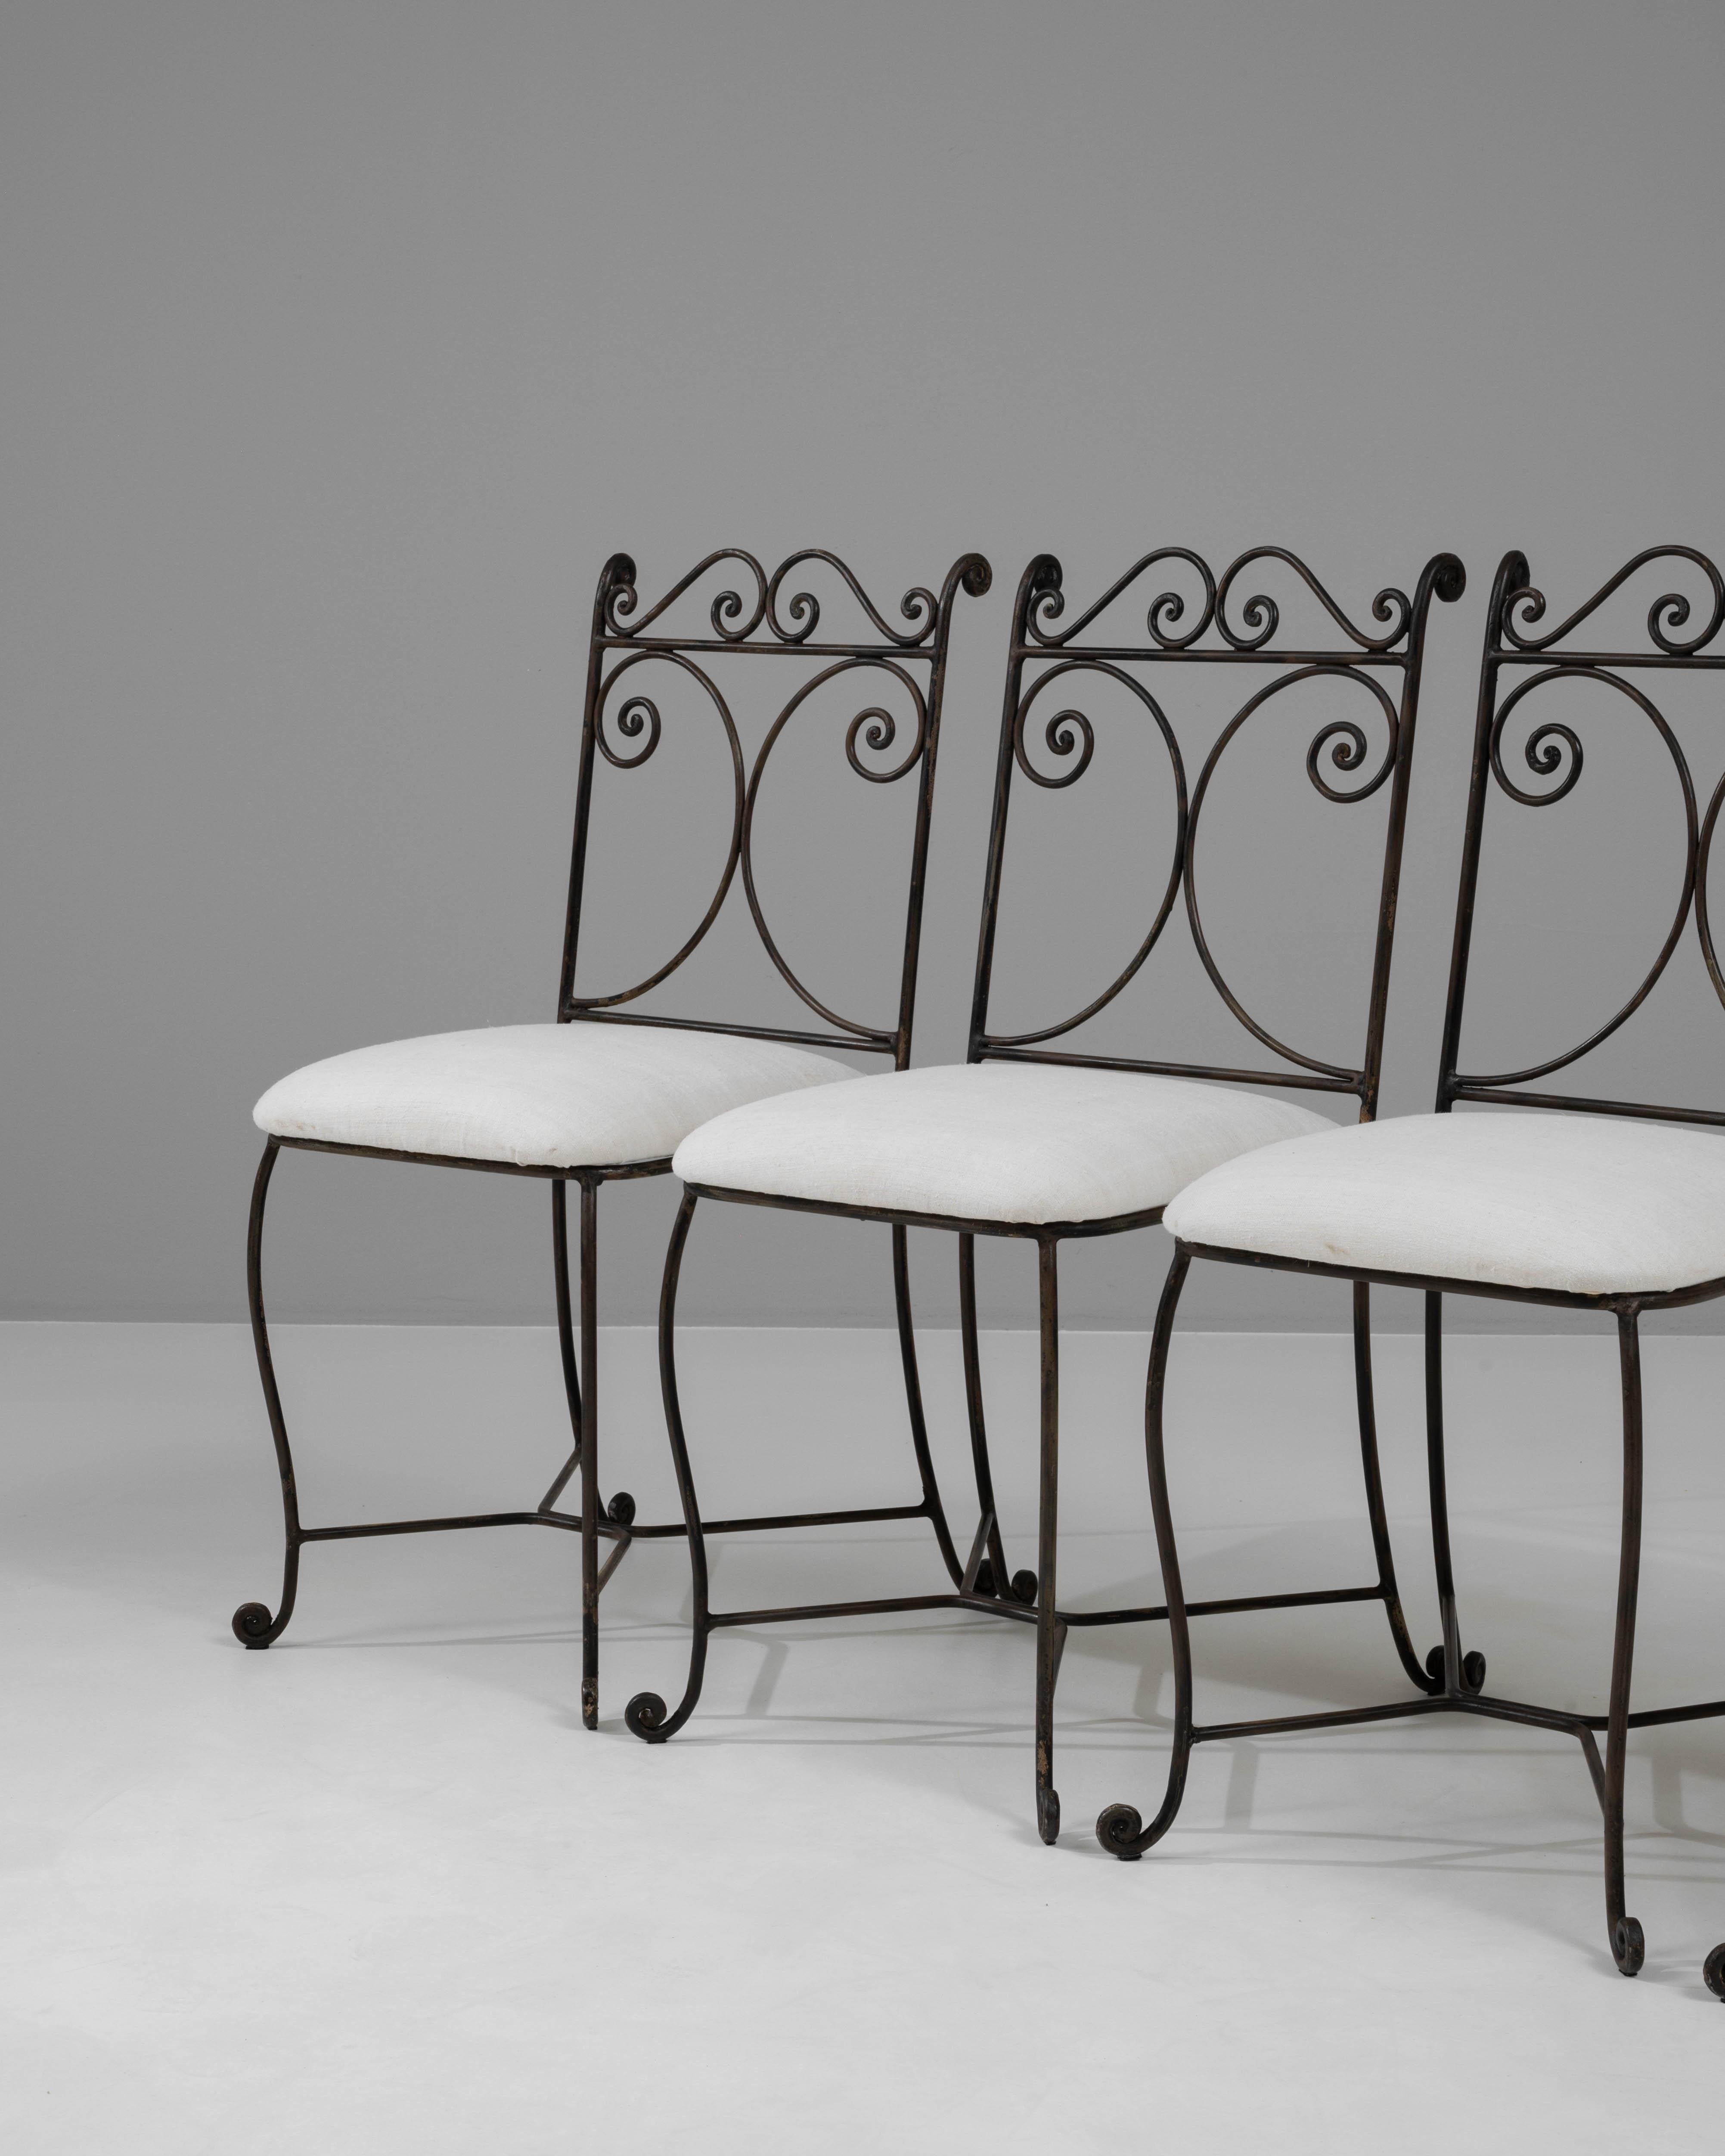 20th Century French Metal Chairs With Upholstered Seats, Set of 4 For Sale 9